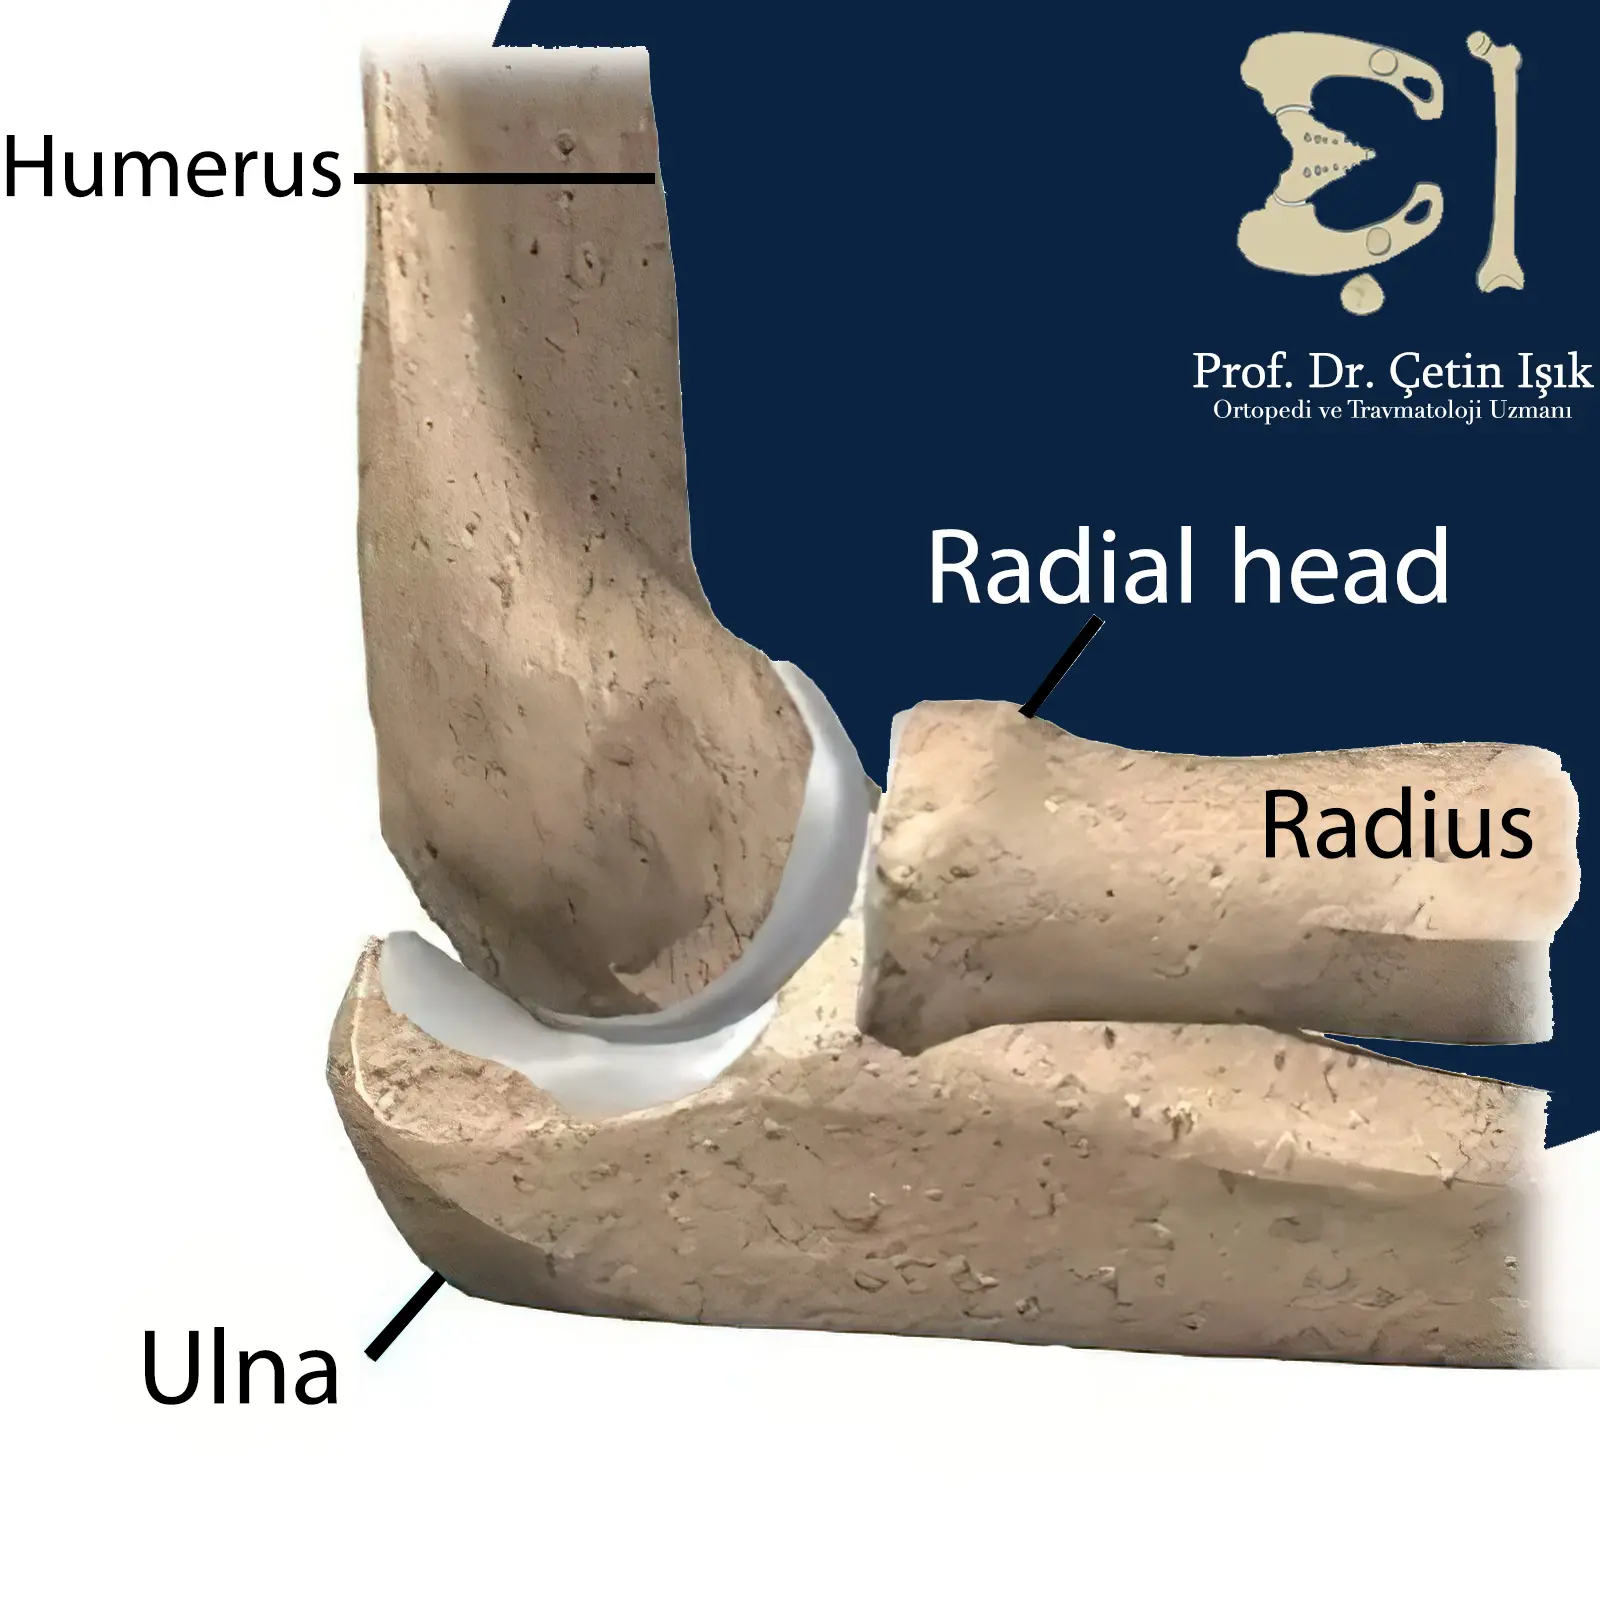 An image showing the components of the elbow joint and the bones that make up this joint